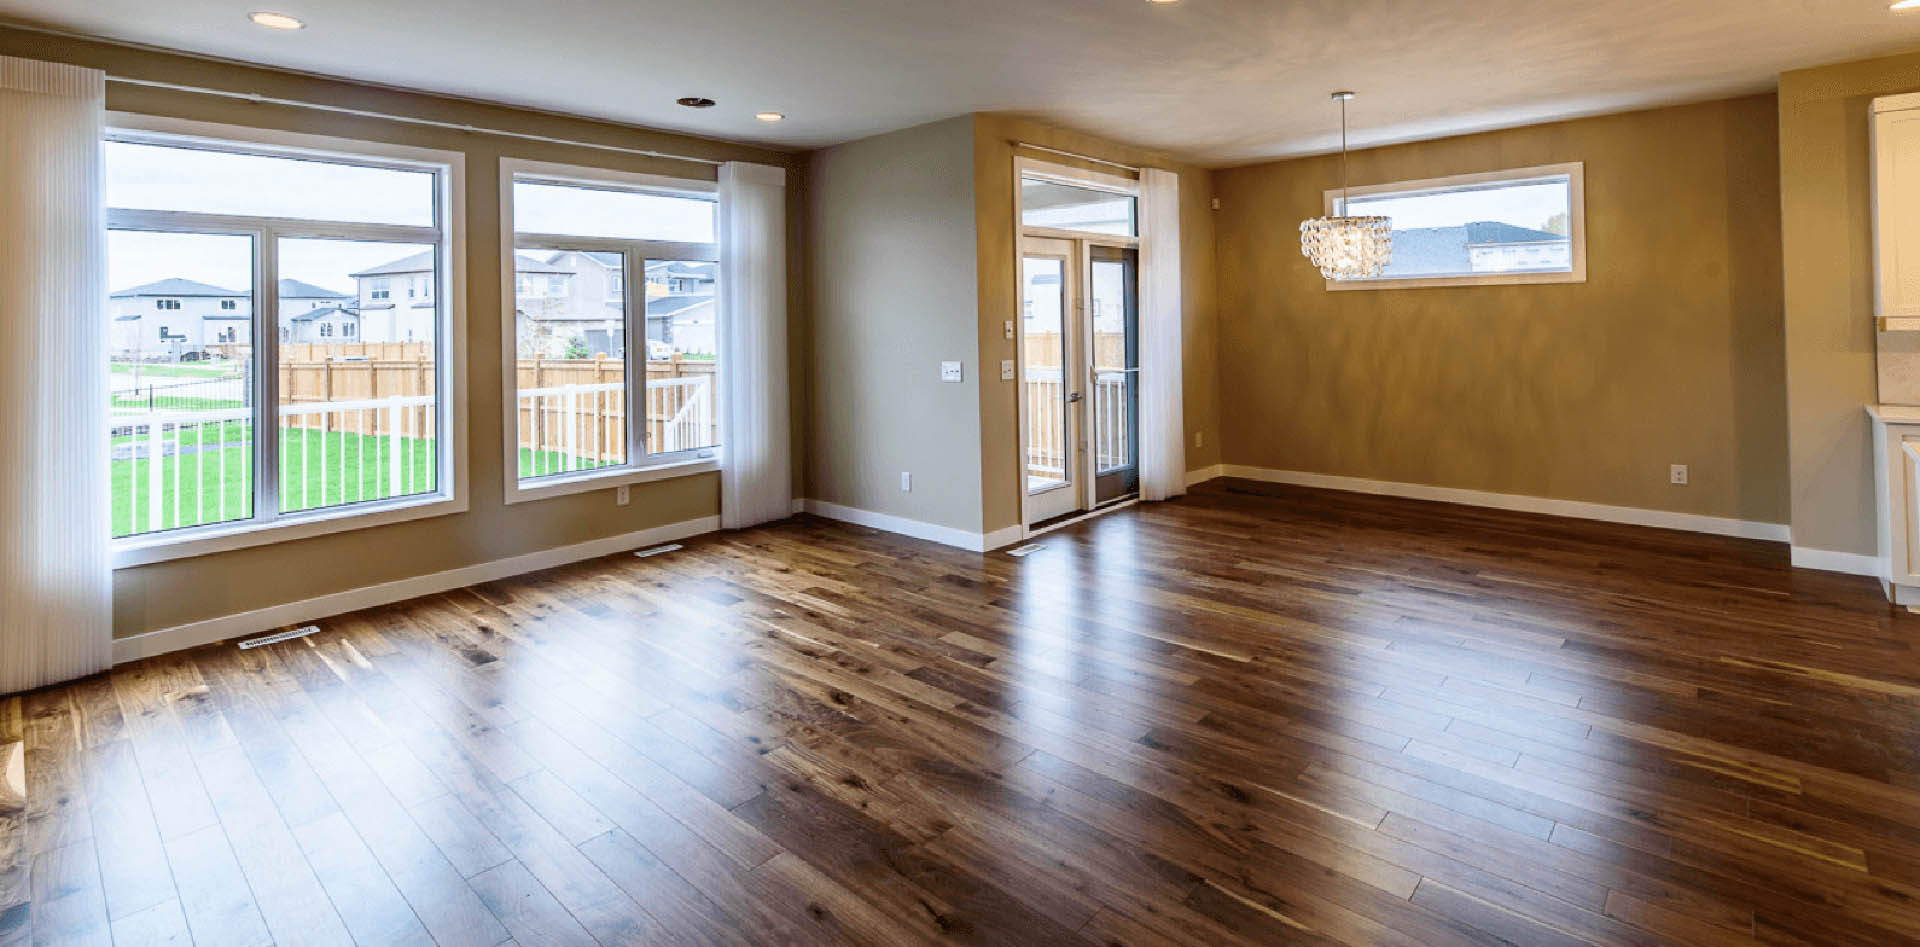 Your Flooring Choices in a New Home Build Hardwood Image